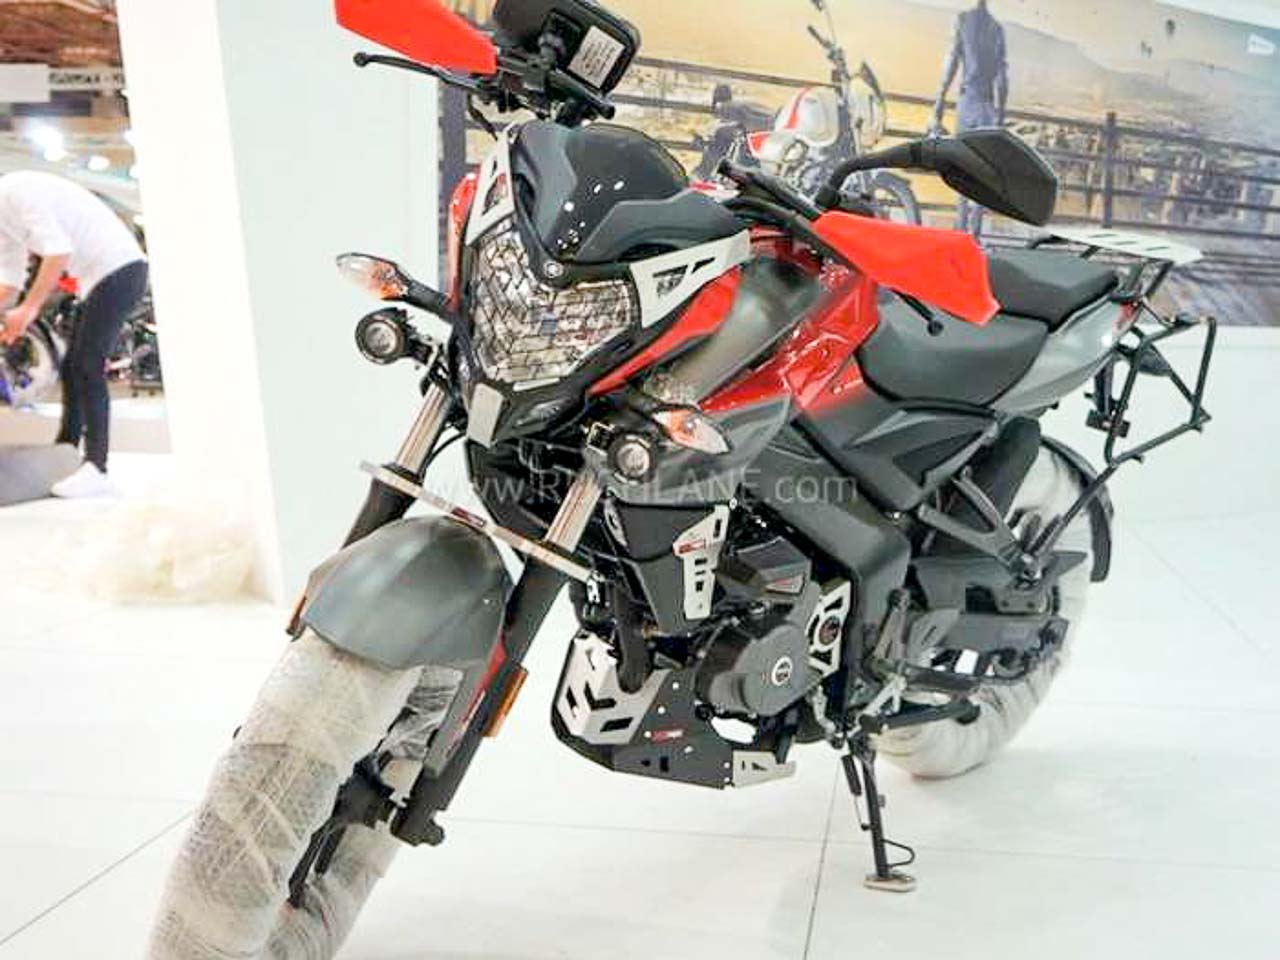 Bajaj to Bring New-Gen Pulsar 250 in 2021 - NS250 and 